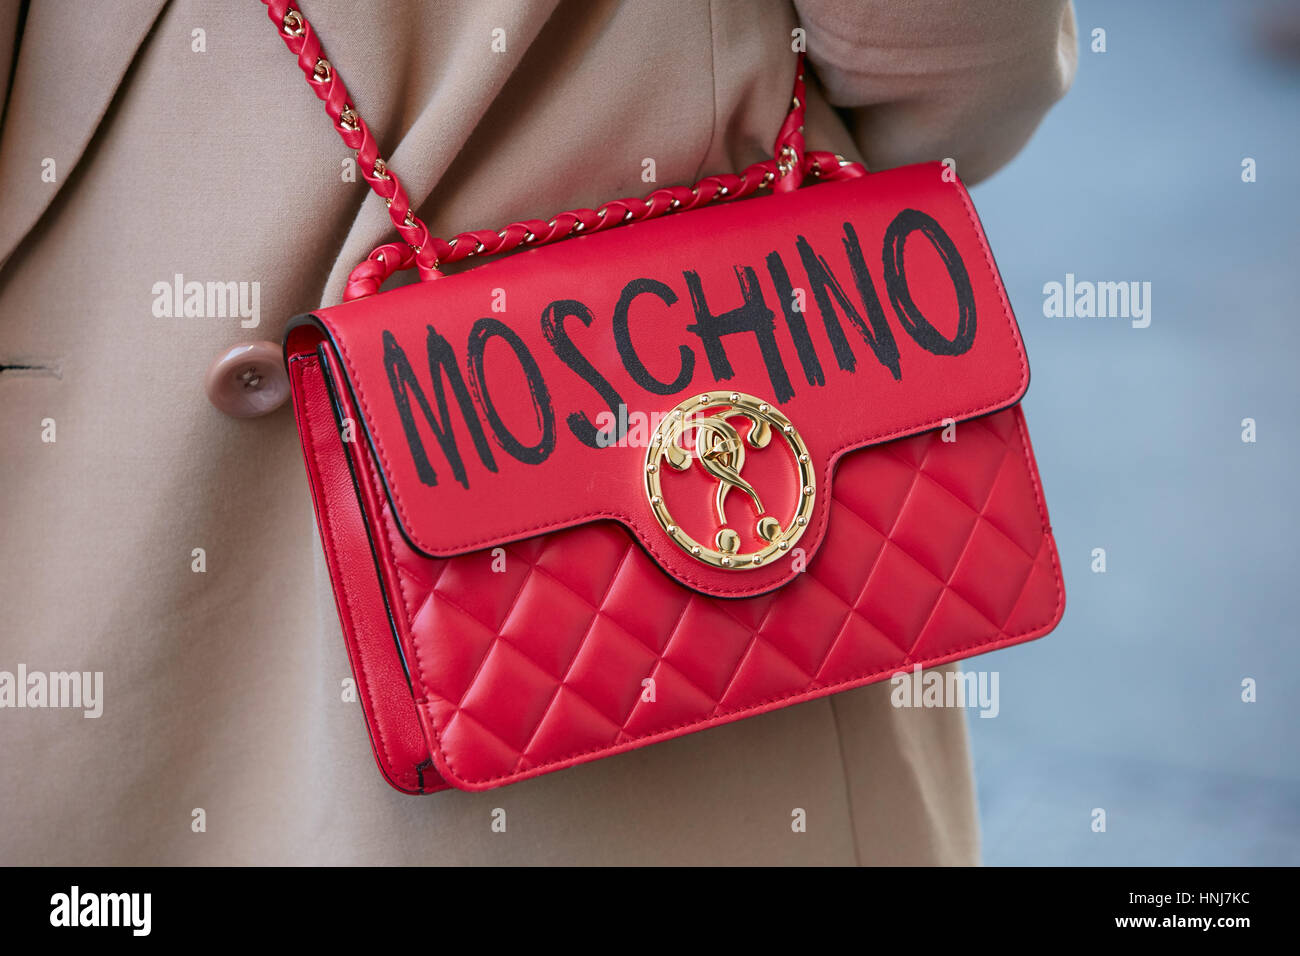 Moschino bag photography and images - Alamy